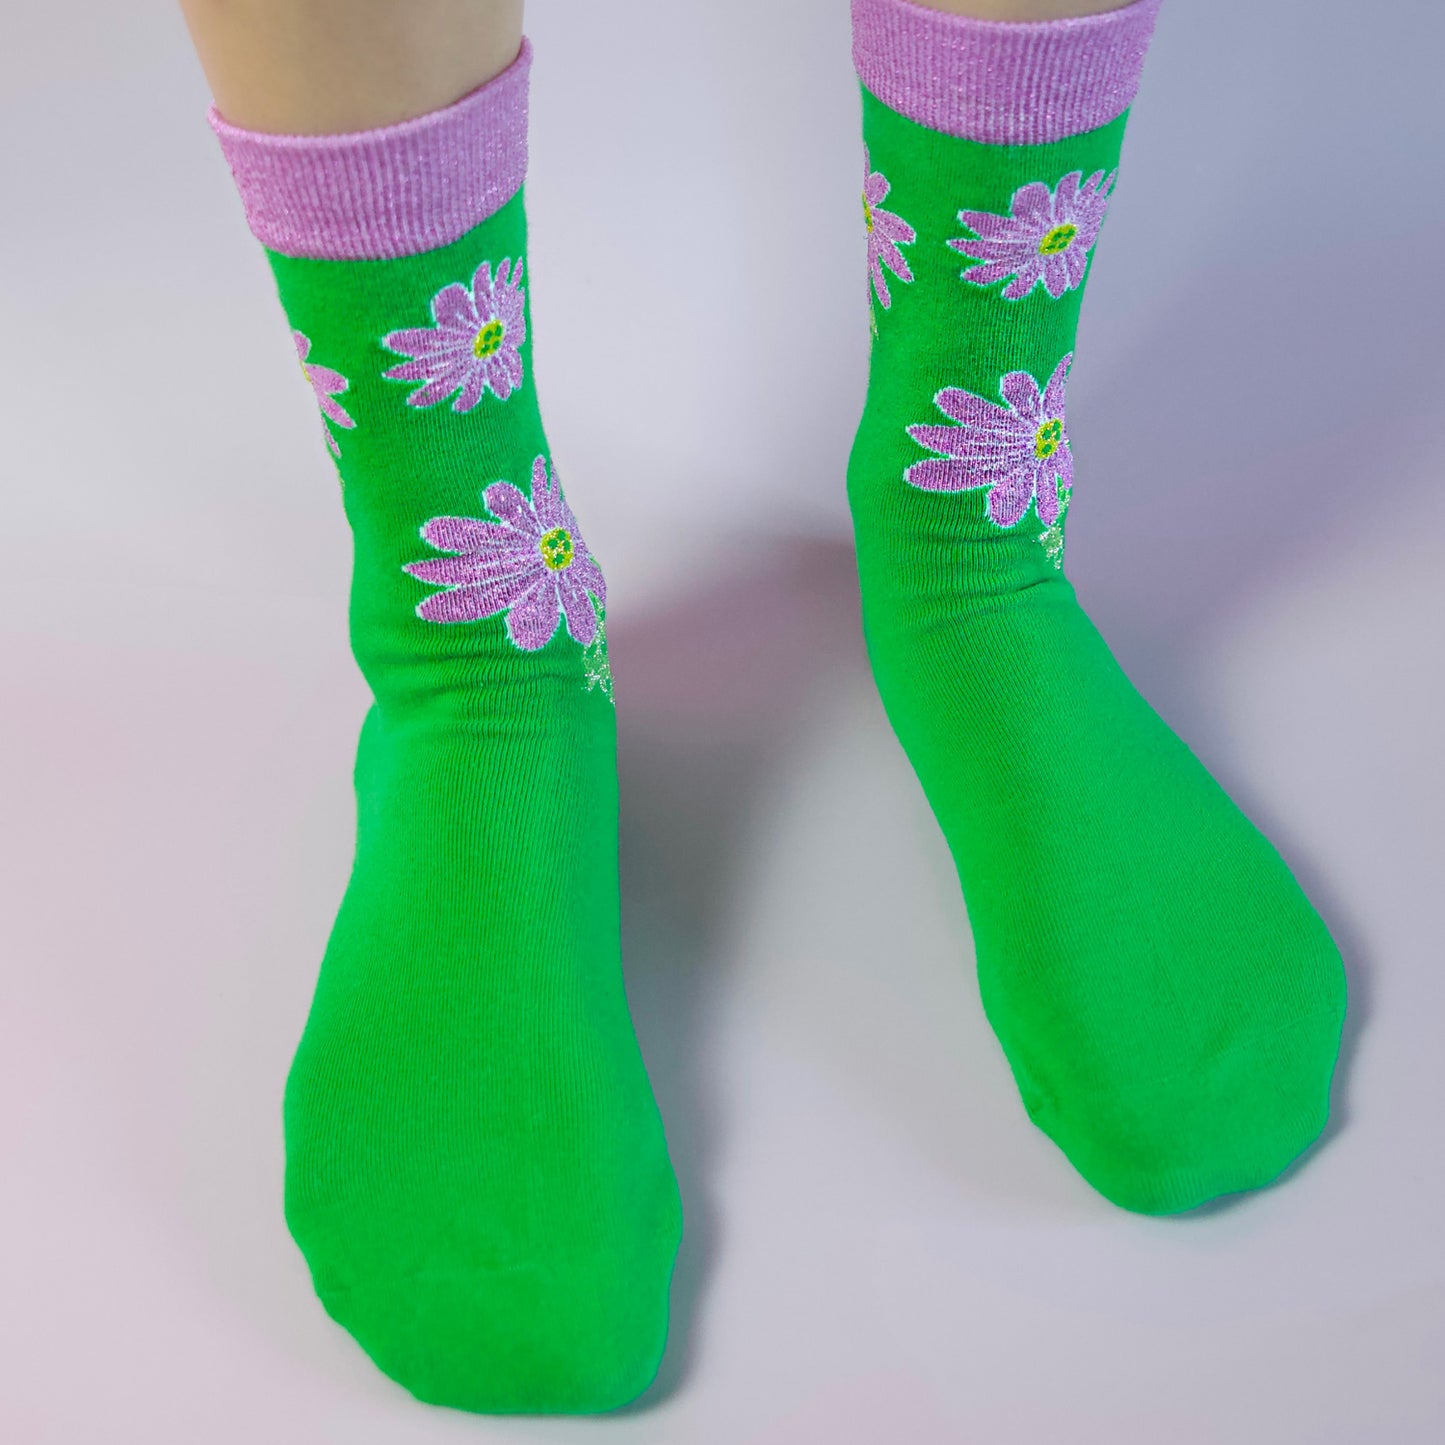 green cotton flower socks with purple flowers with sparkly metallic yarn